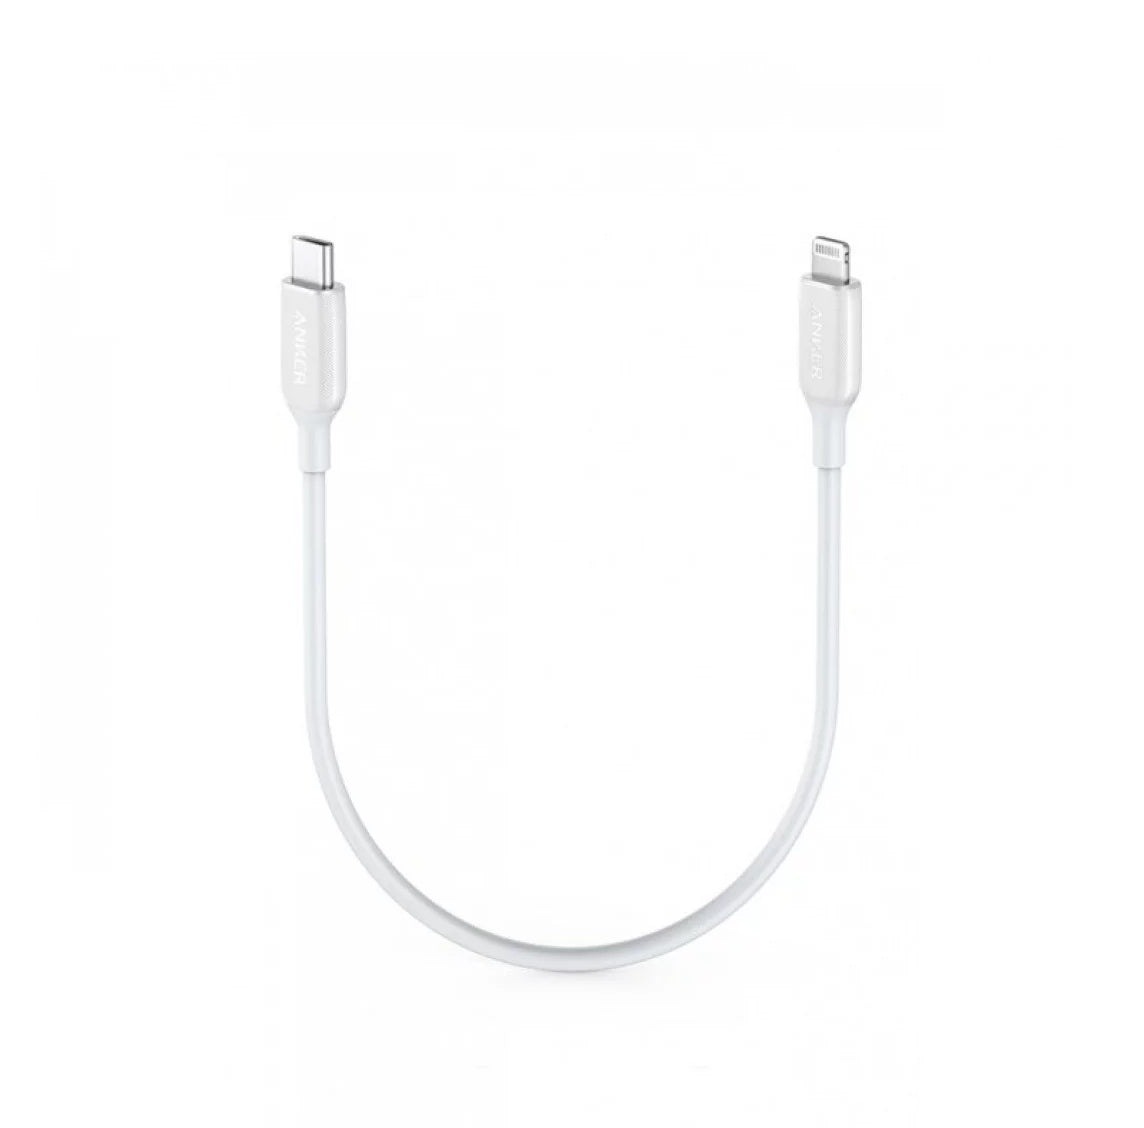 ANKER POWERLINE III USB-C TO LIGHTNING CABLE (1 FEET) - WHITE